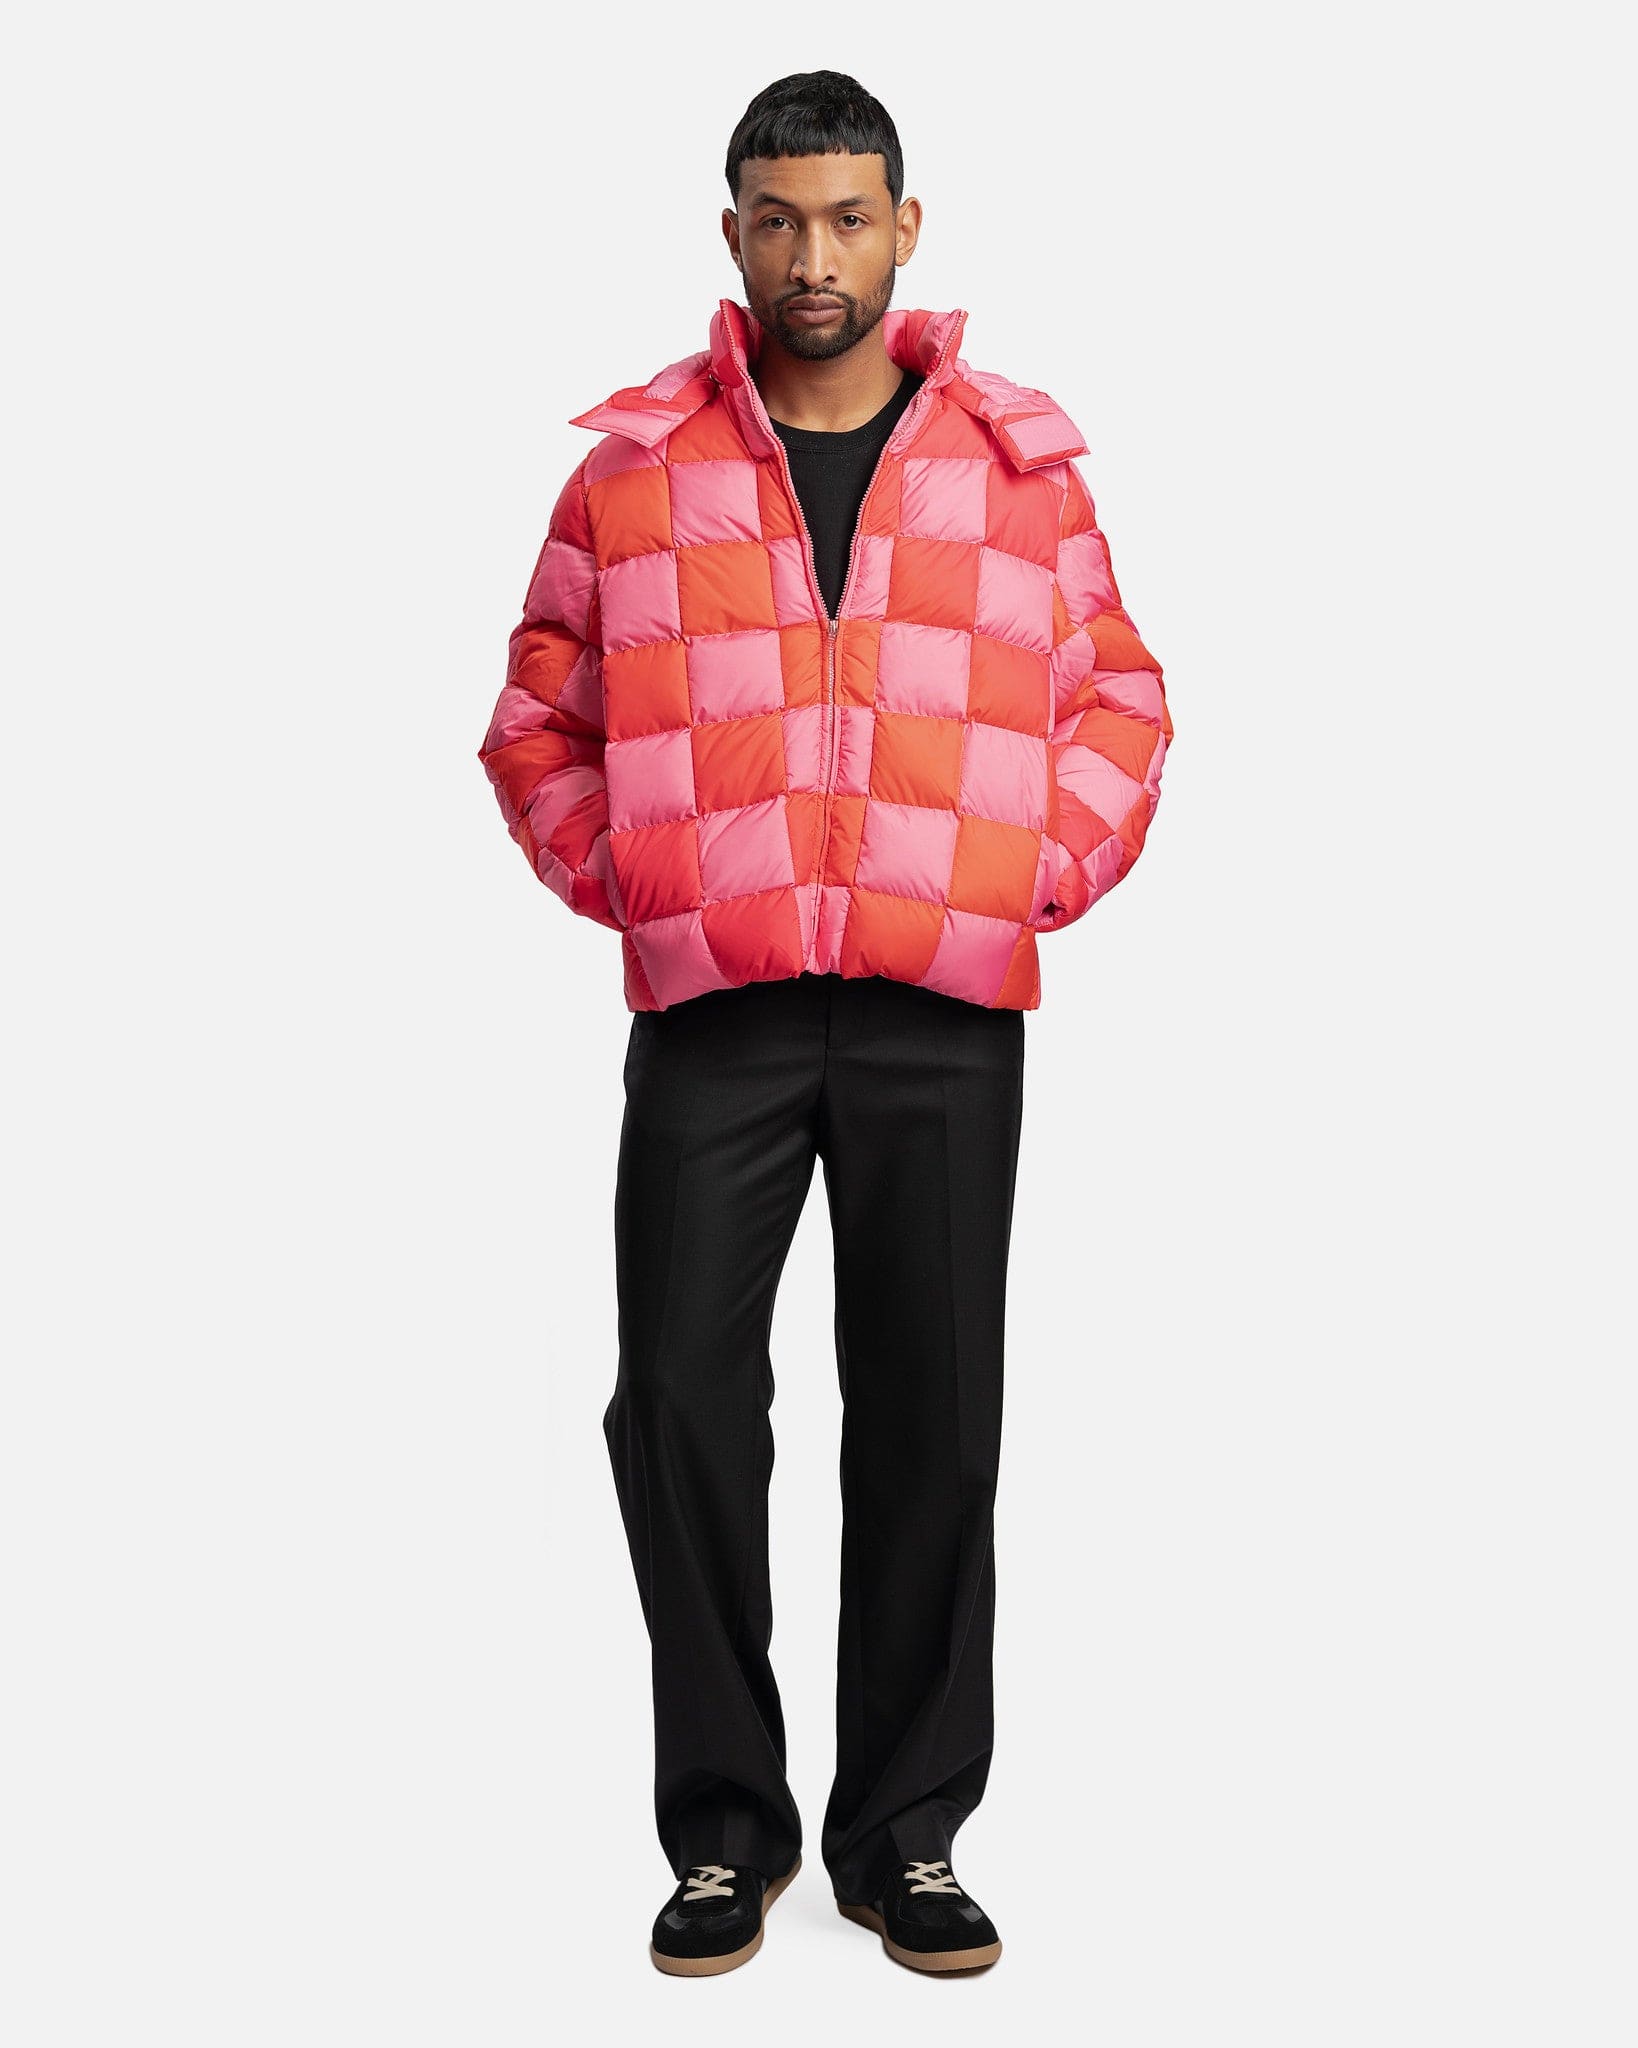 ERL Men's Jackets Gradient Checker Hooded Puffer Coat in Pink